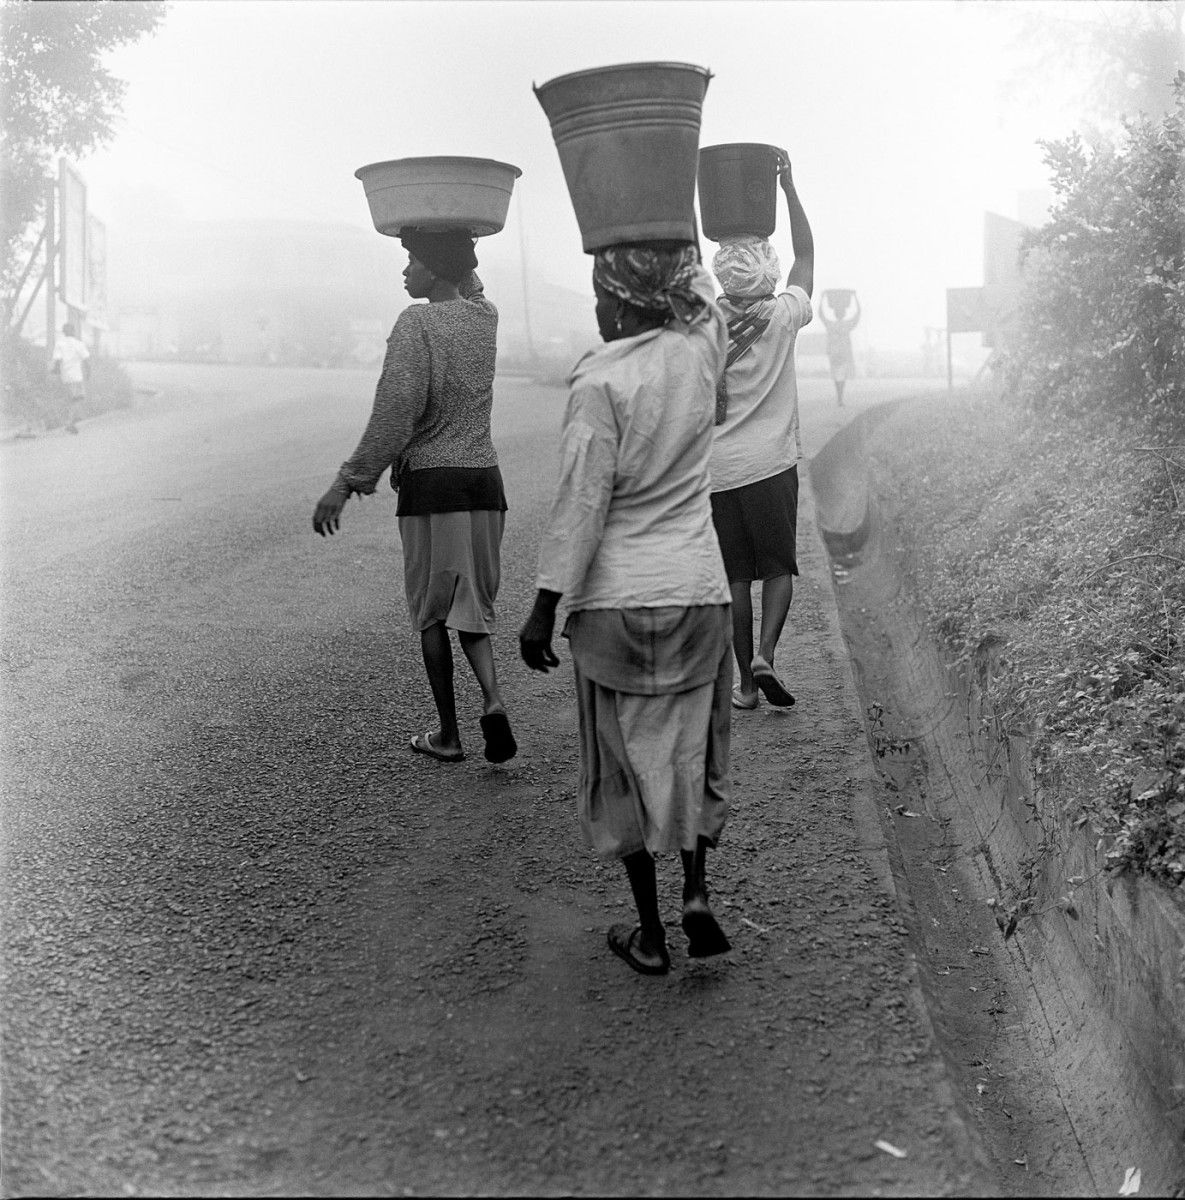 Frank Stewart, Clock of the Earth, Mamfe, Ghana, 1998, inkjet print, 30 x 30 in. Guess Family Collection, Louisville, KY